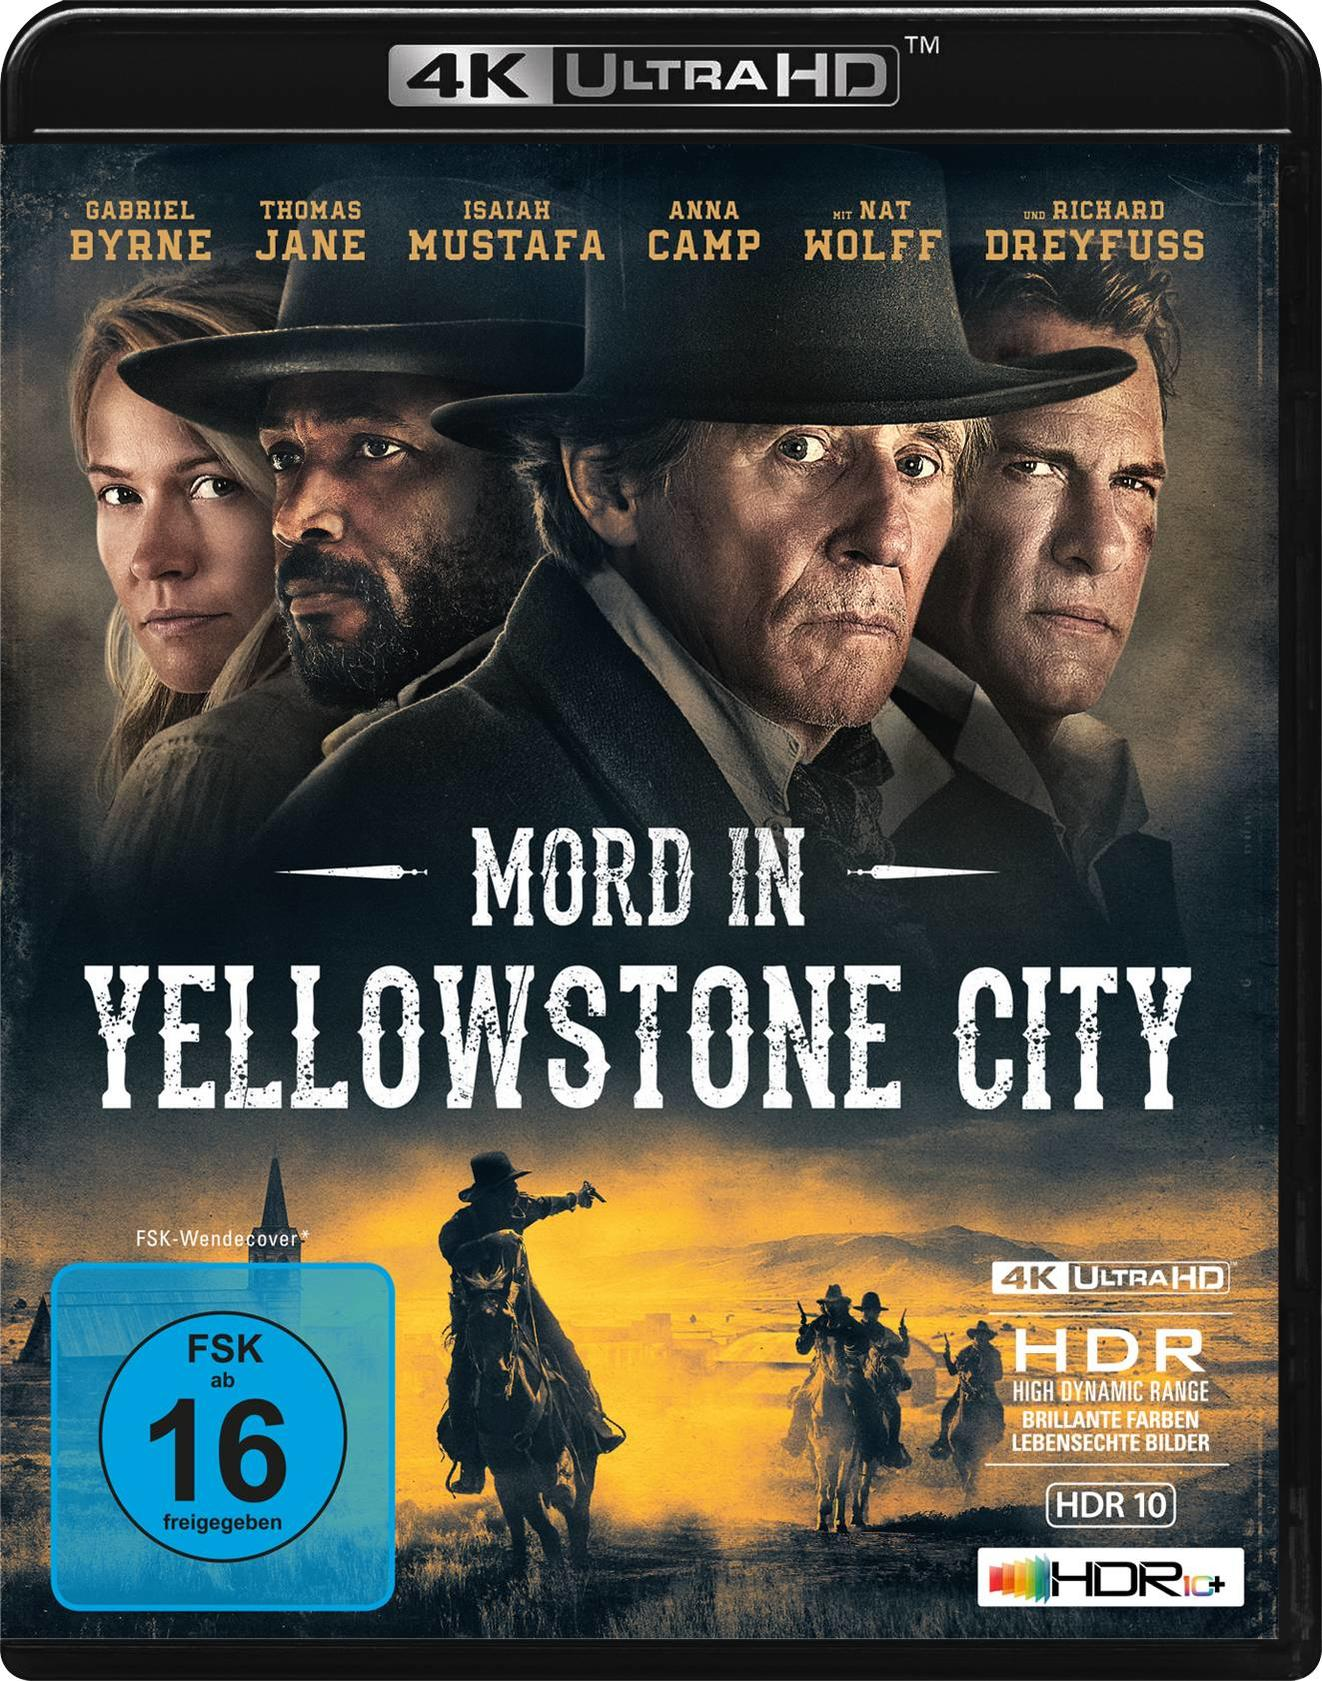 DVD Yellowstone Mord City in